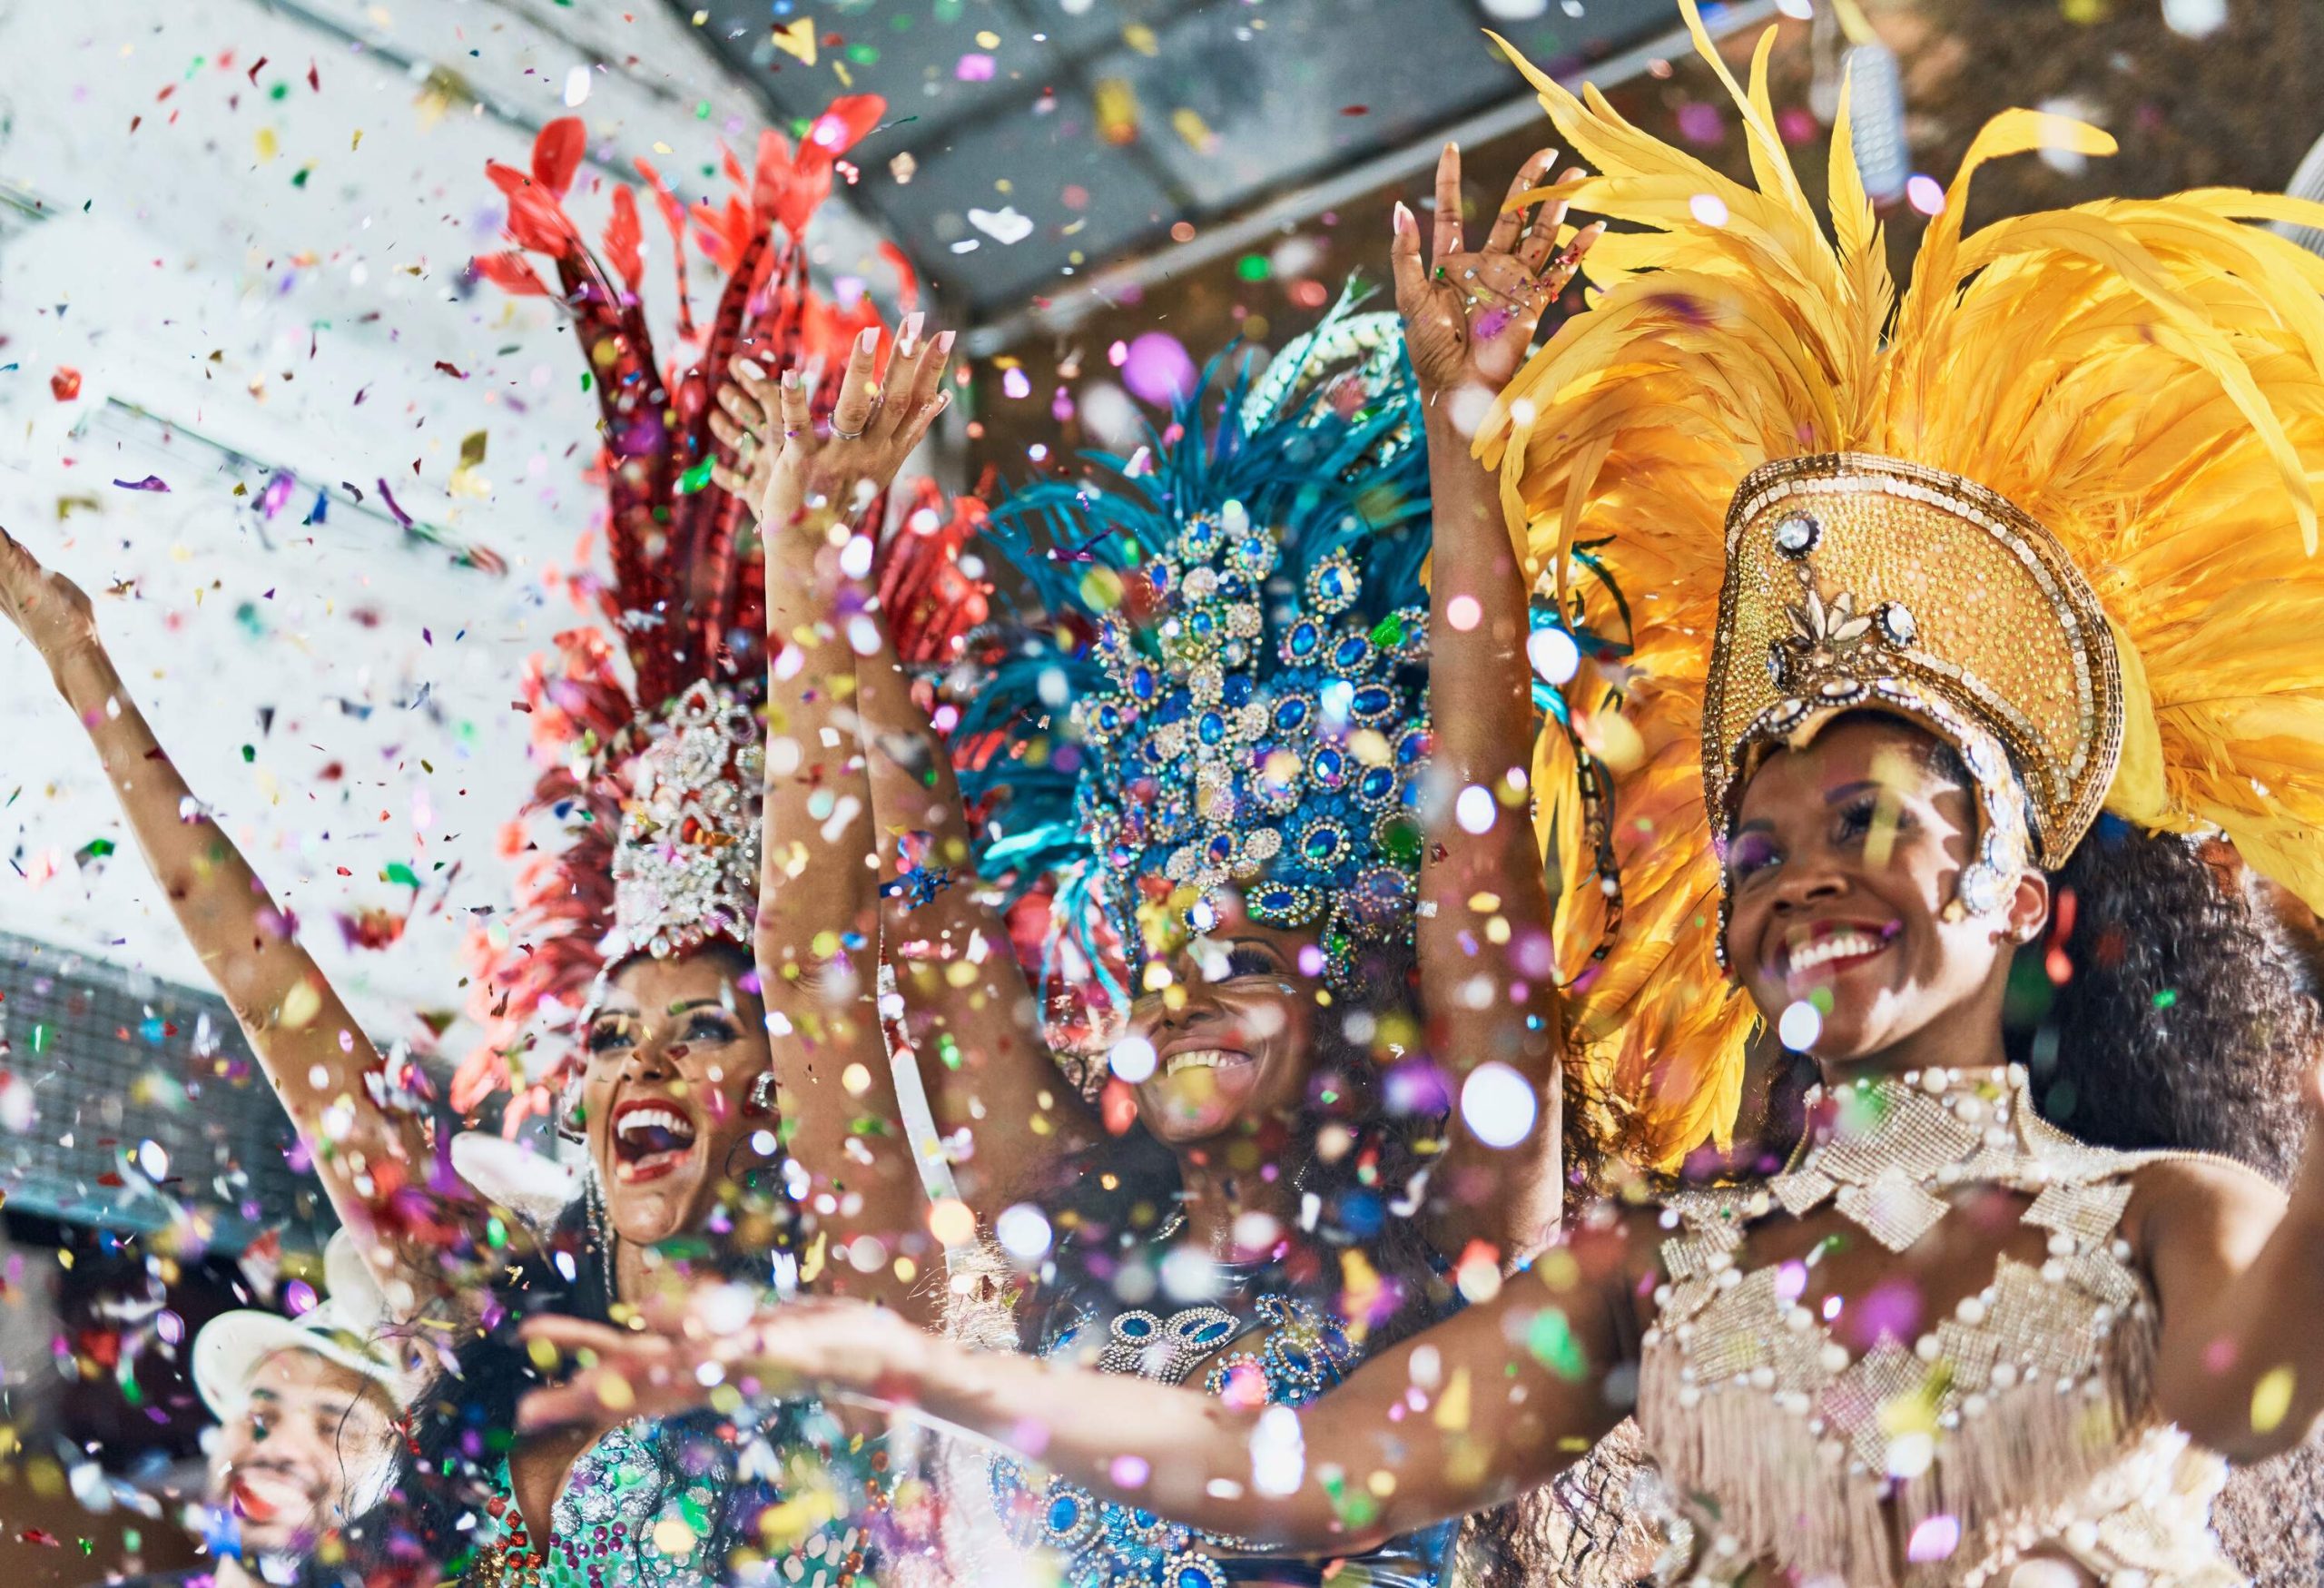 dest_brazil_rio-de-janeiro_carnival_gettyimages-921837604_universal_within-usage-period_61295